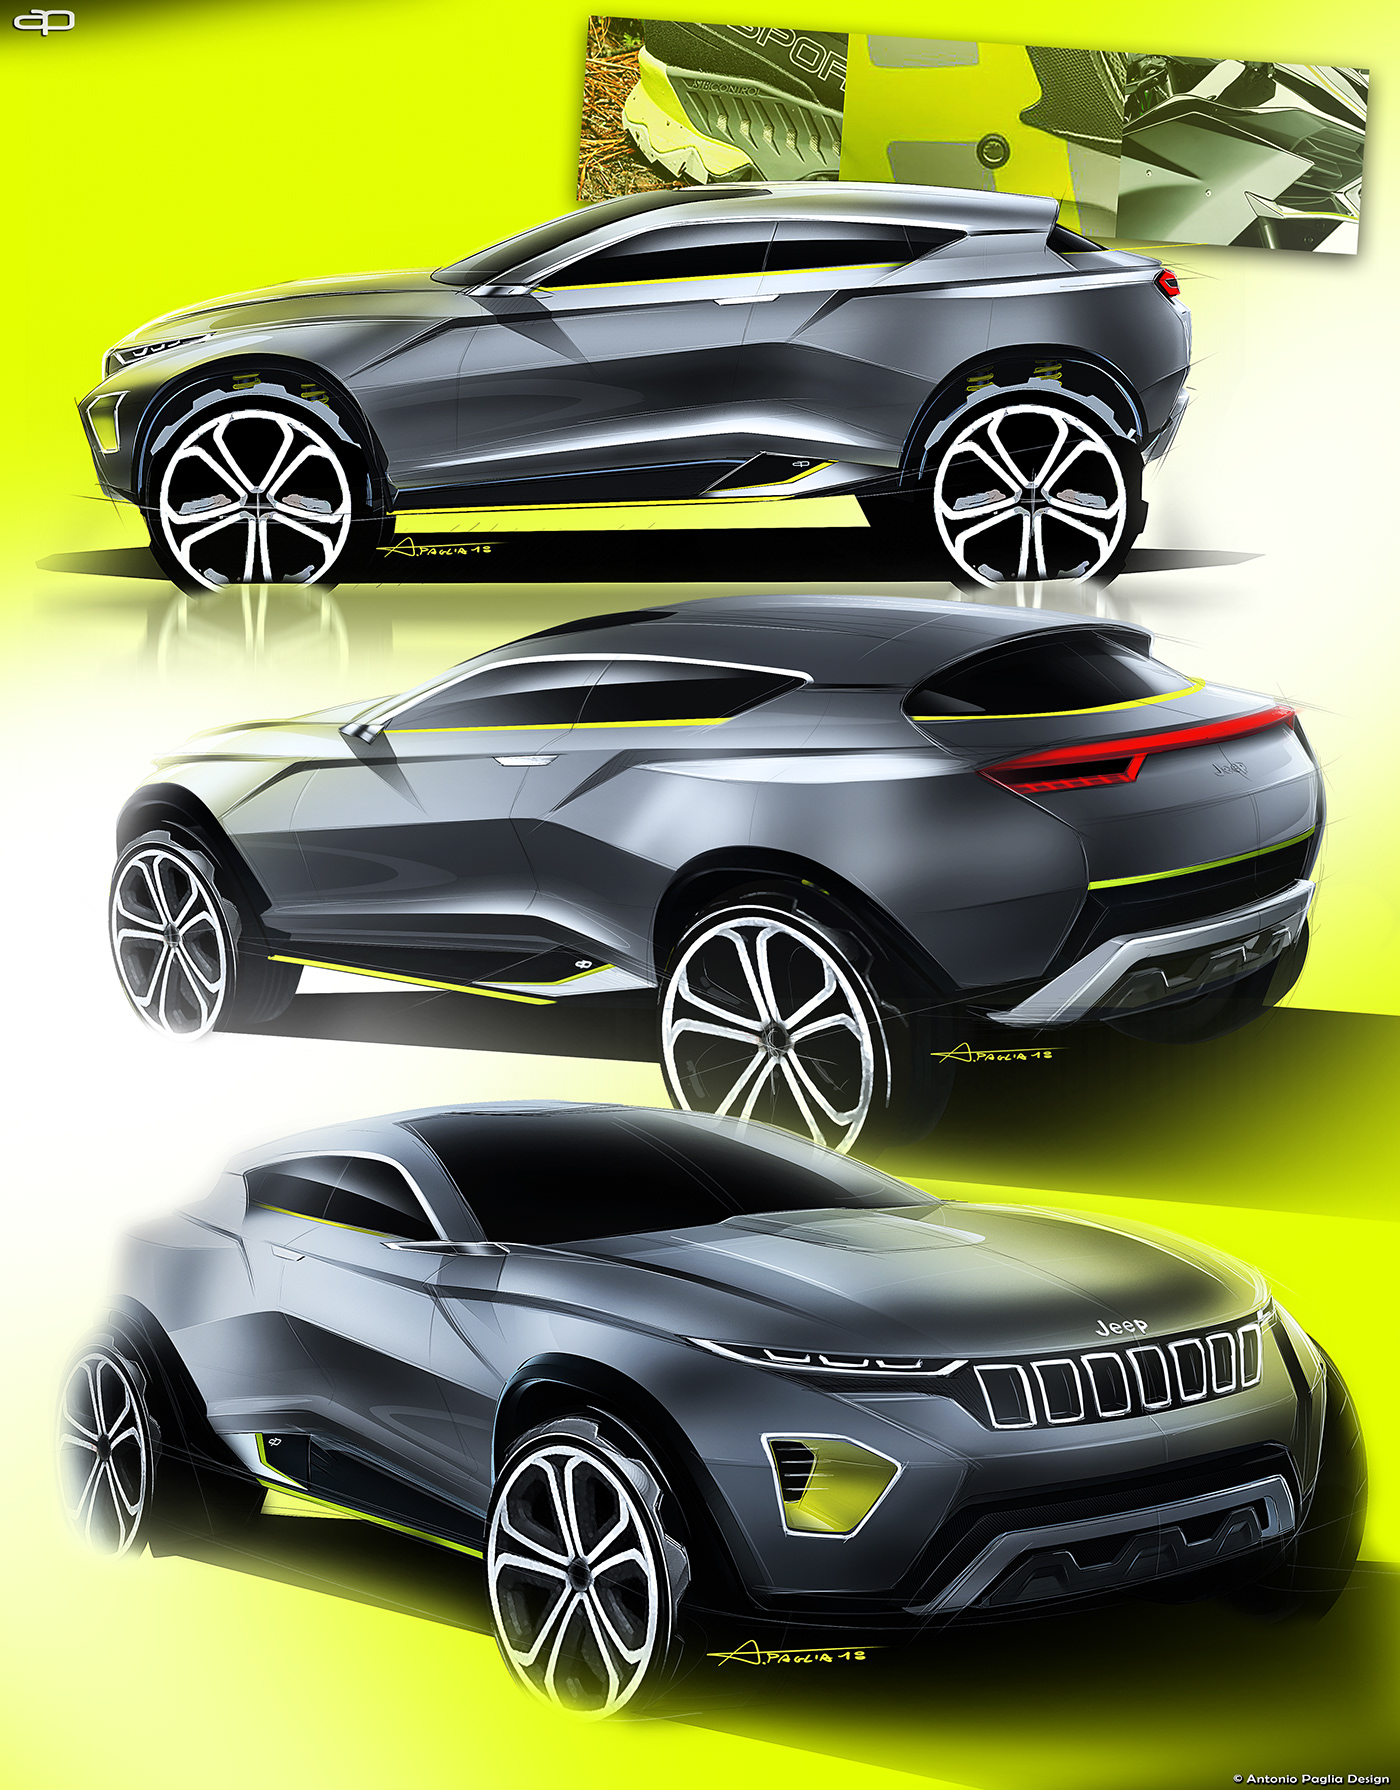 jeep suv concept off road jeep freedom Jeep concept car design automotive   Render VRED